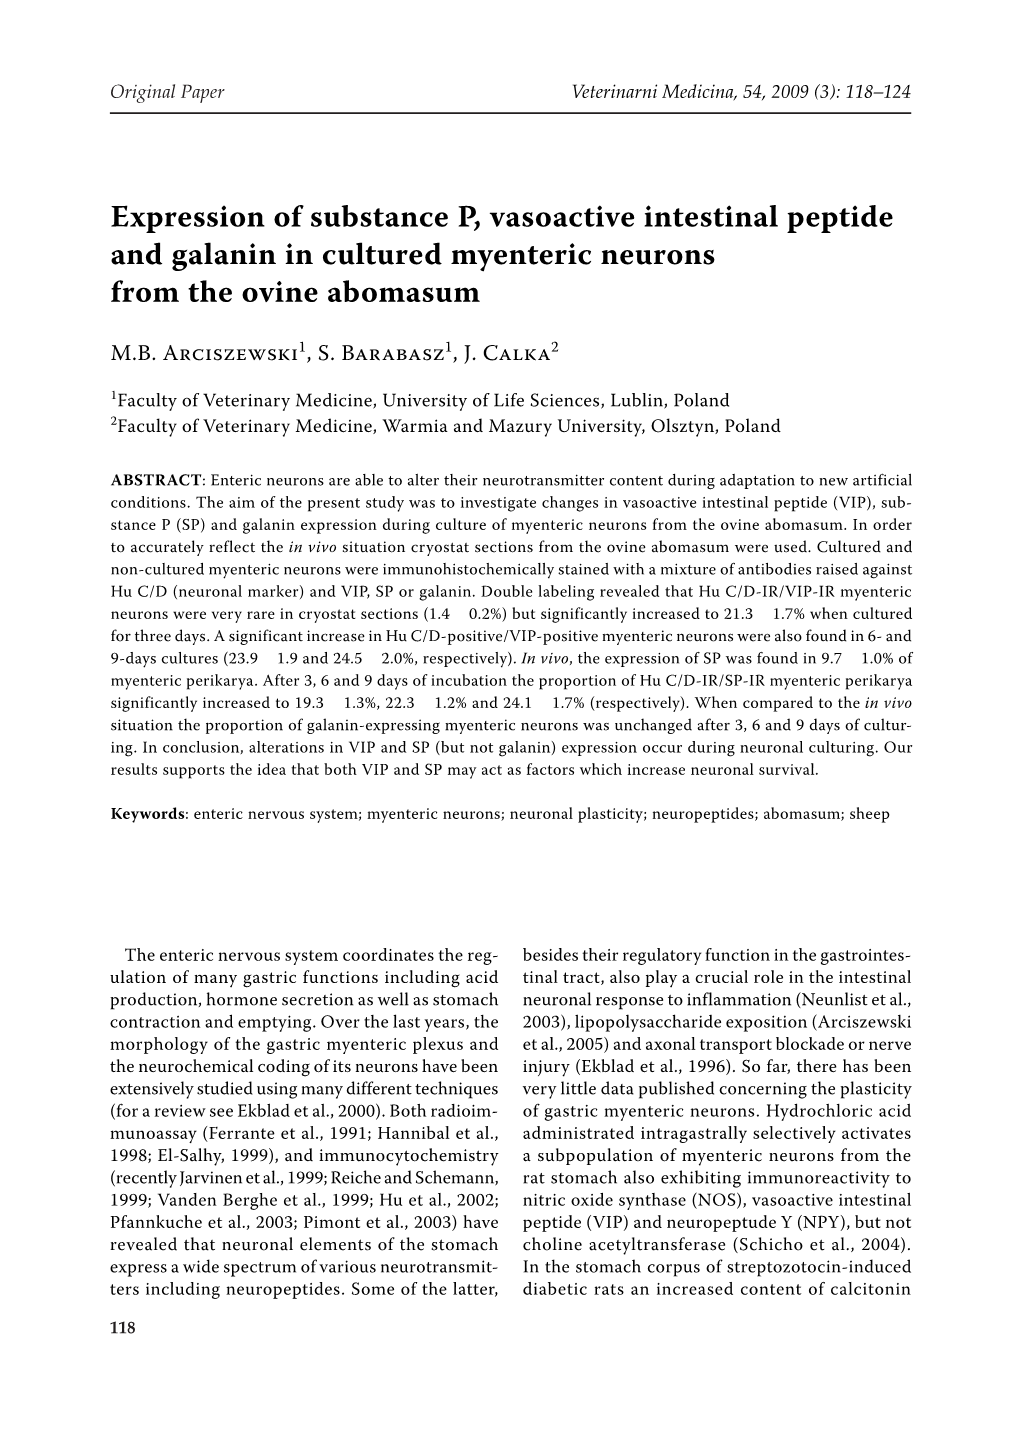 Expression of Substance P, Vasoactive Intestinal Peptide and Galanin in Cultured Myenteric Neurons from the Ovine Abomasum